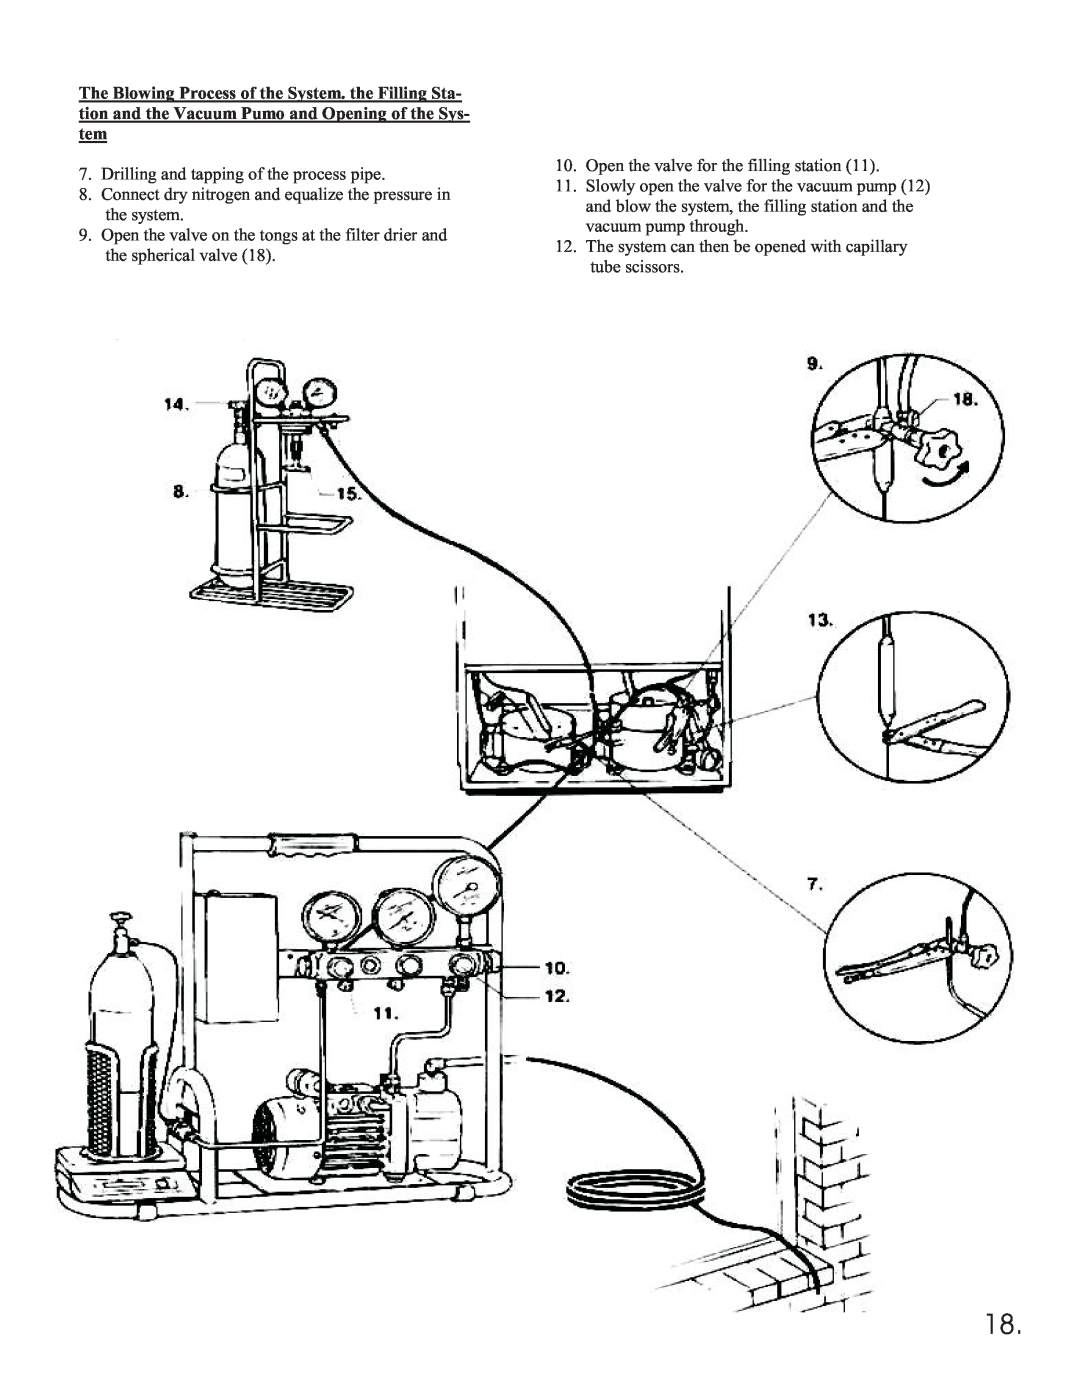 Equator 375 service manual Drilling and tapping of the process pipe 